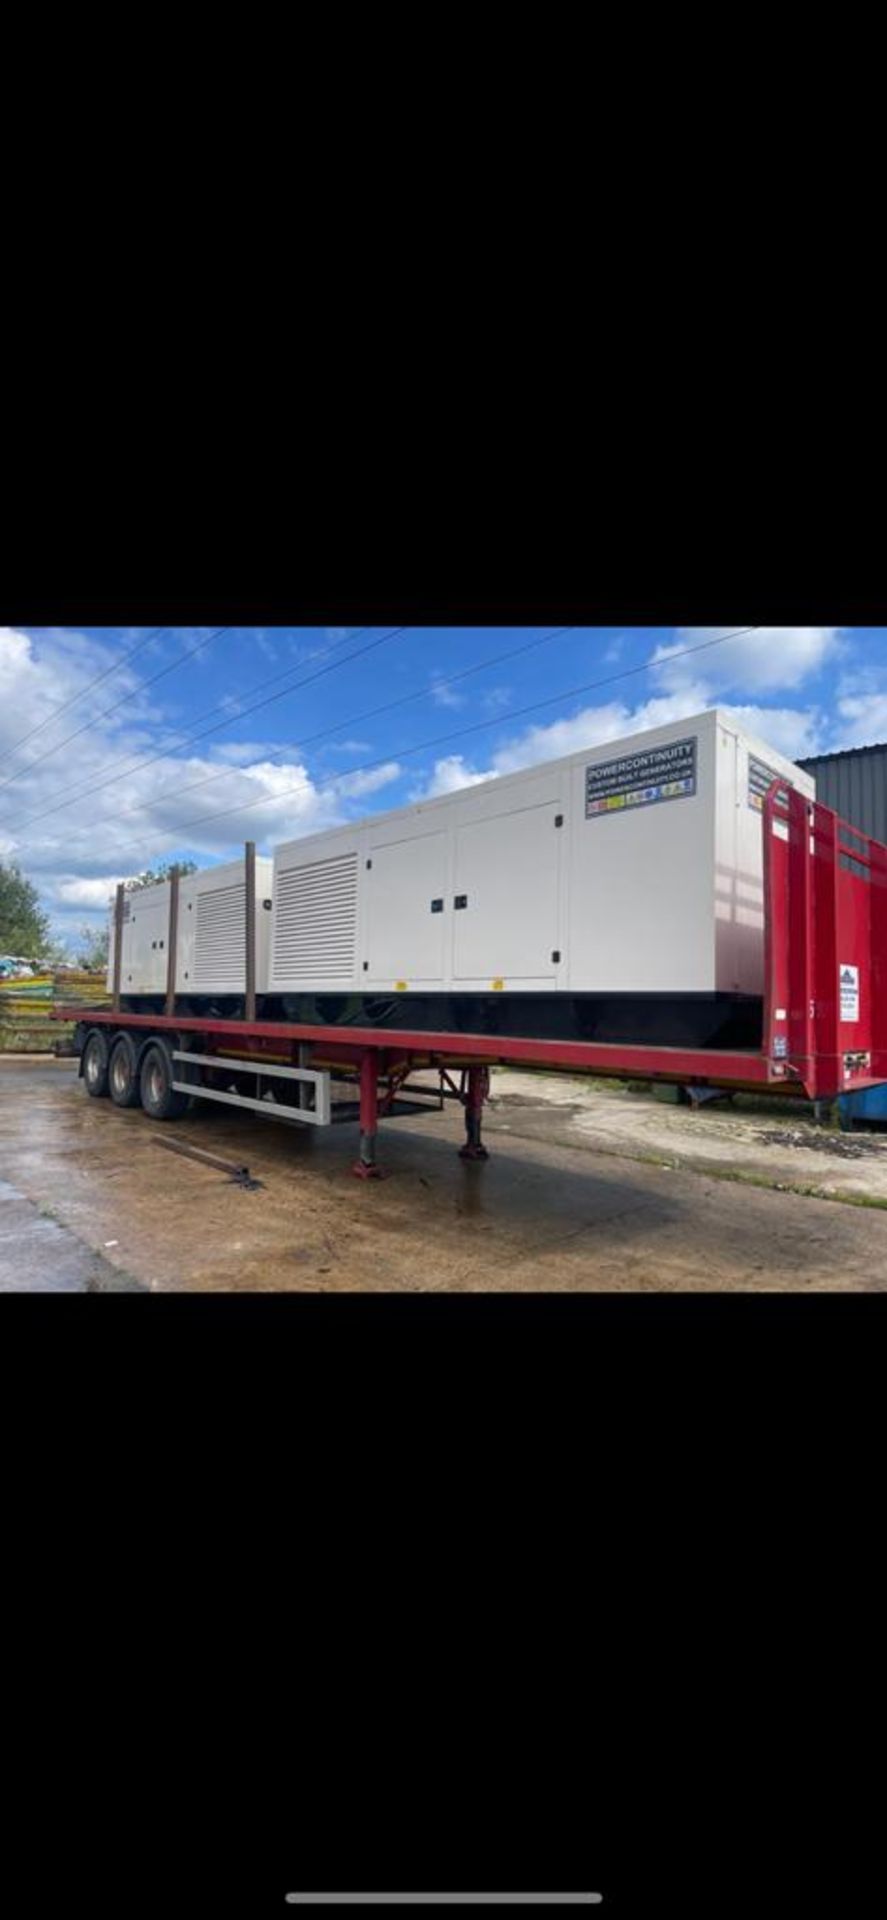 Two Diesel Powered Three Phase Electric Generators with Scania Marine V8 Engines (2018), 1 x 715